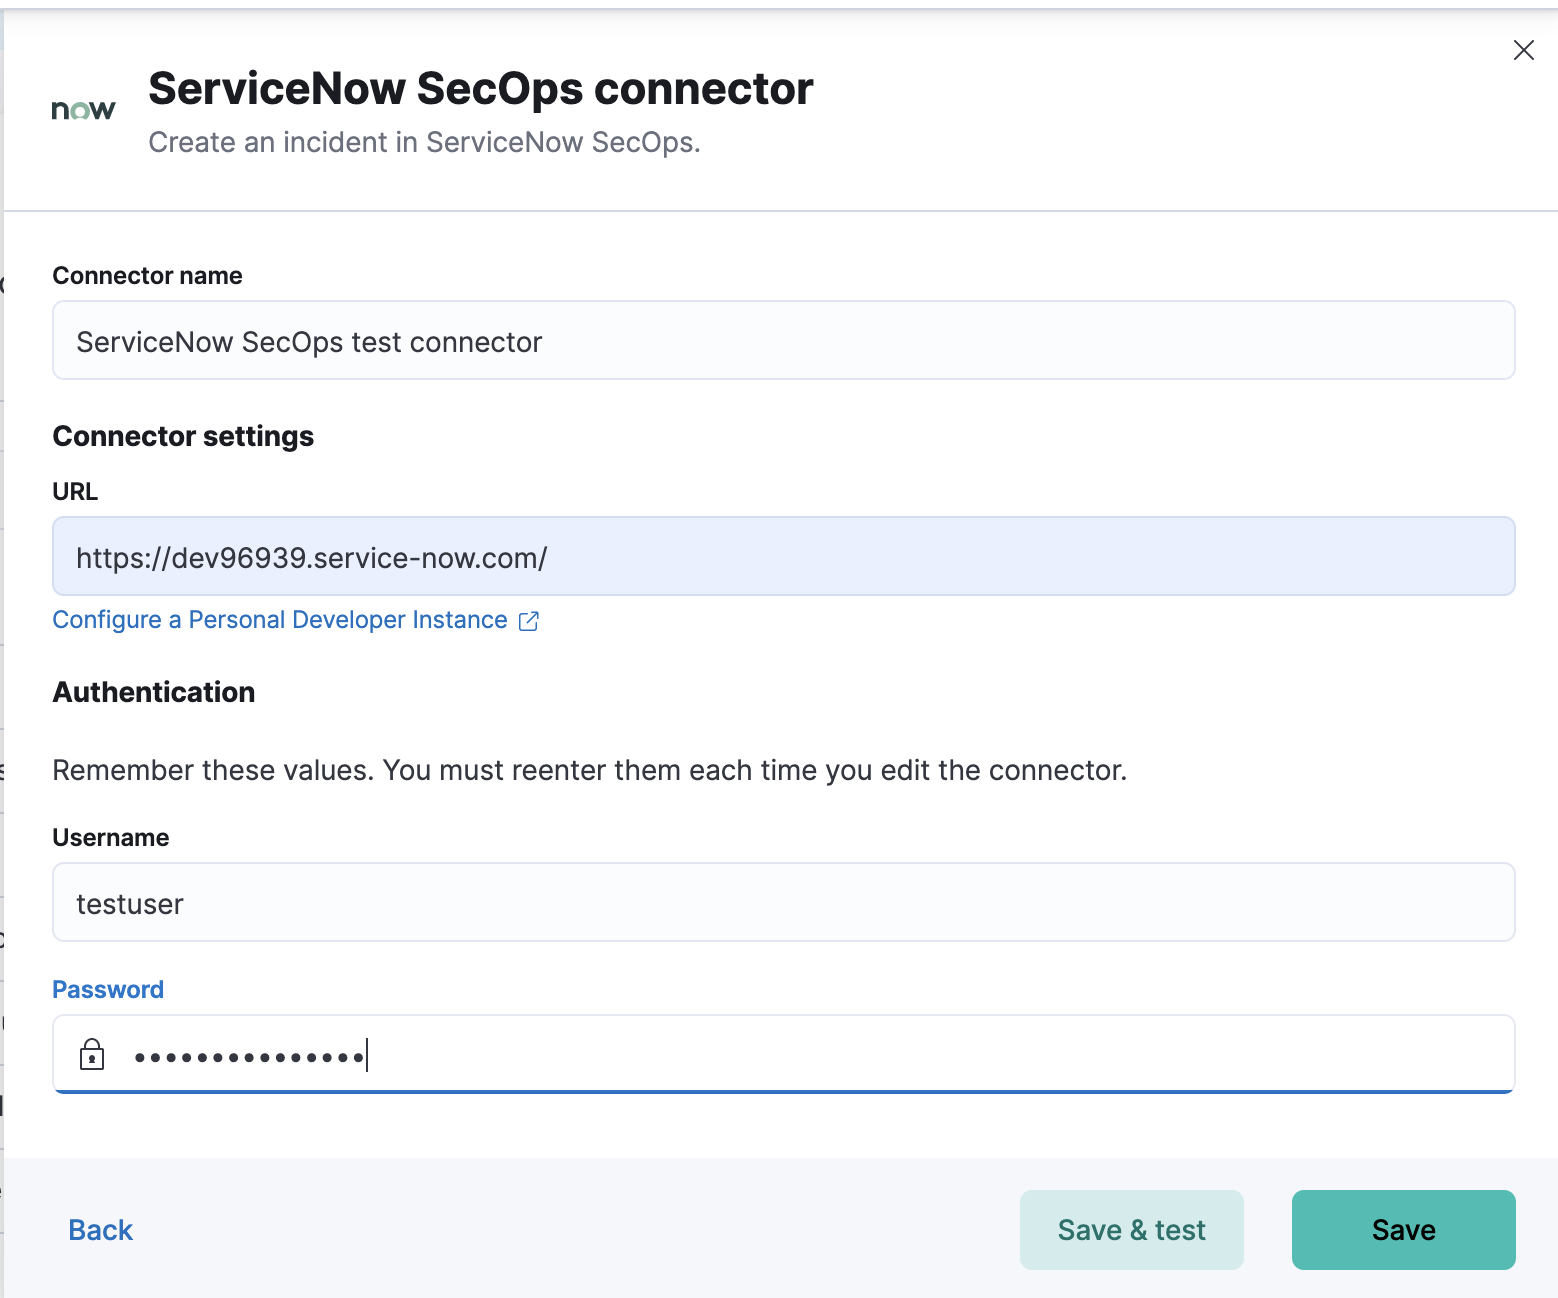 ServiceNow SecOps connector